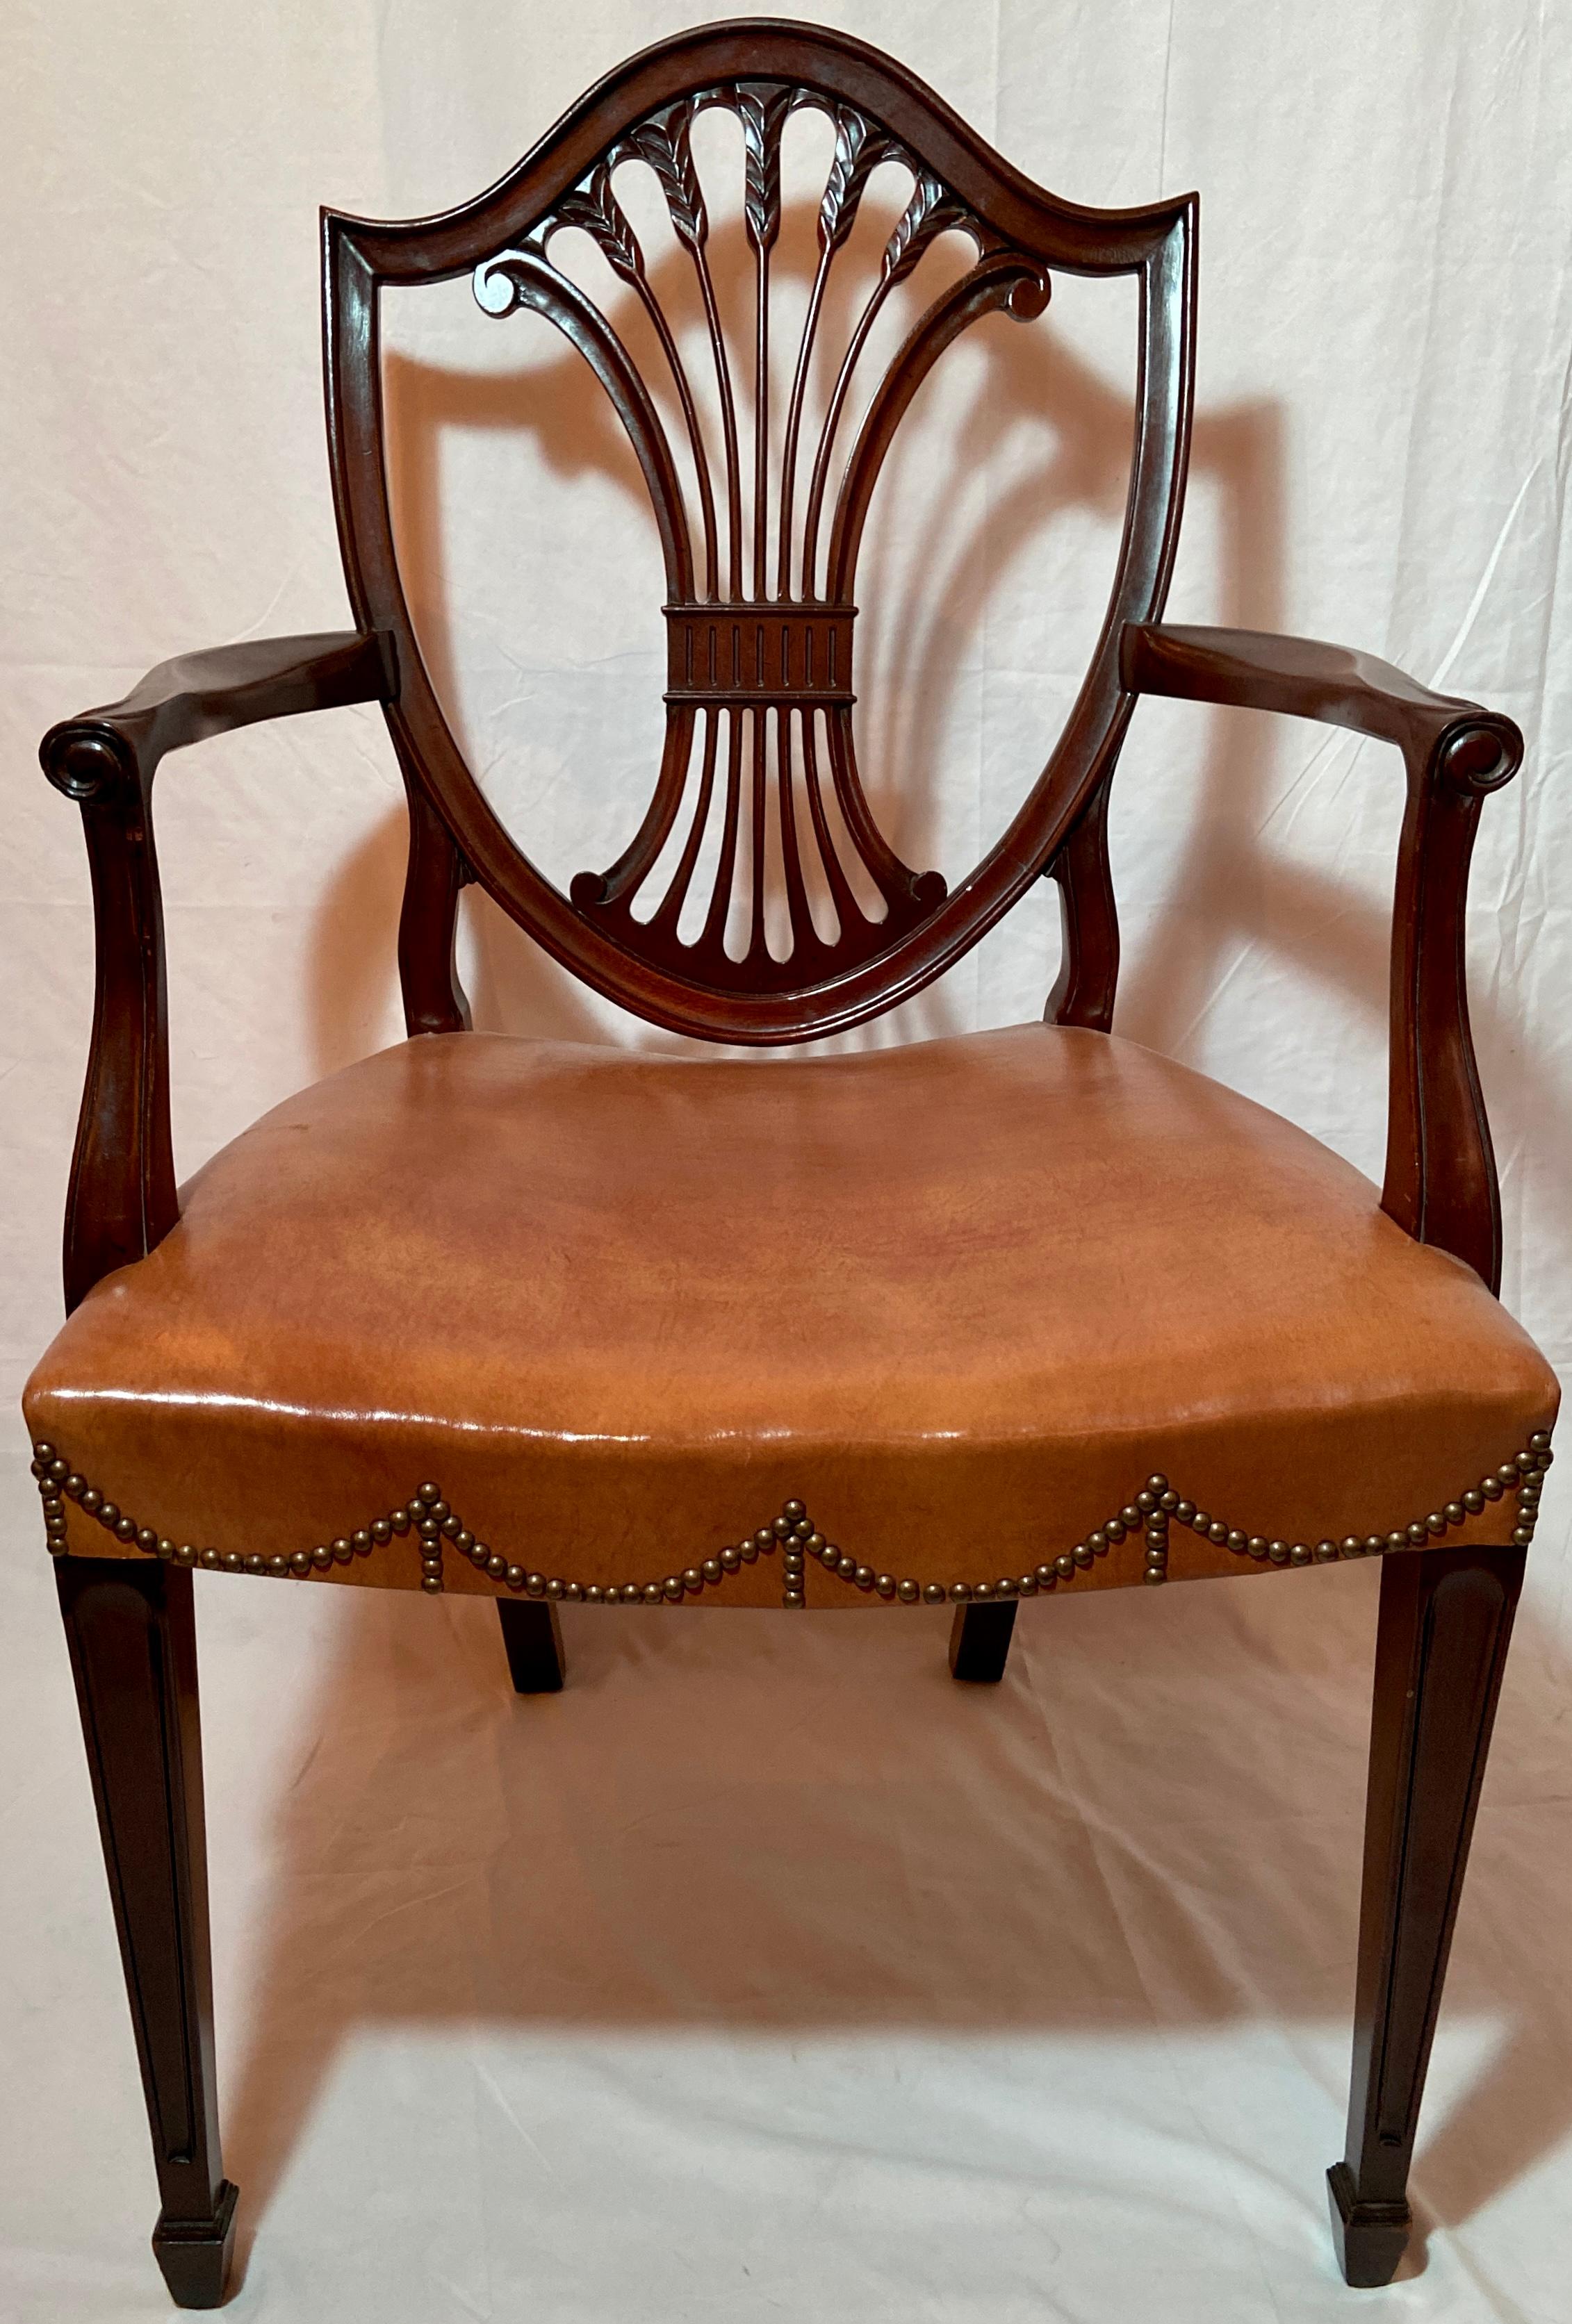 Set of 10 Estate English mahogany Hepplewhite shield-back dining chairs, circa 1940s-1950s. Leather upholstery with pretty grommet detailing.
8 side chairs and 2 armchairs.